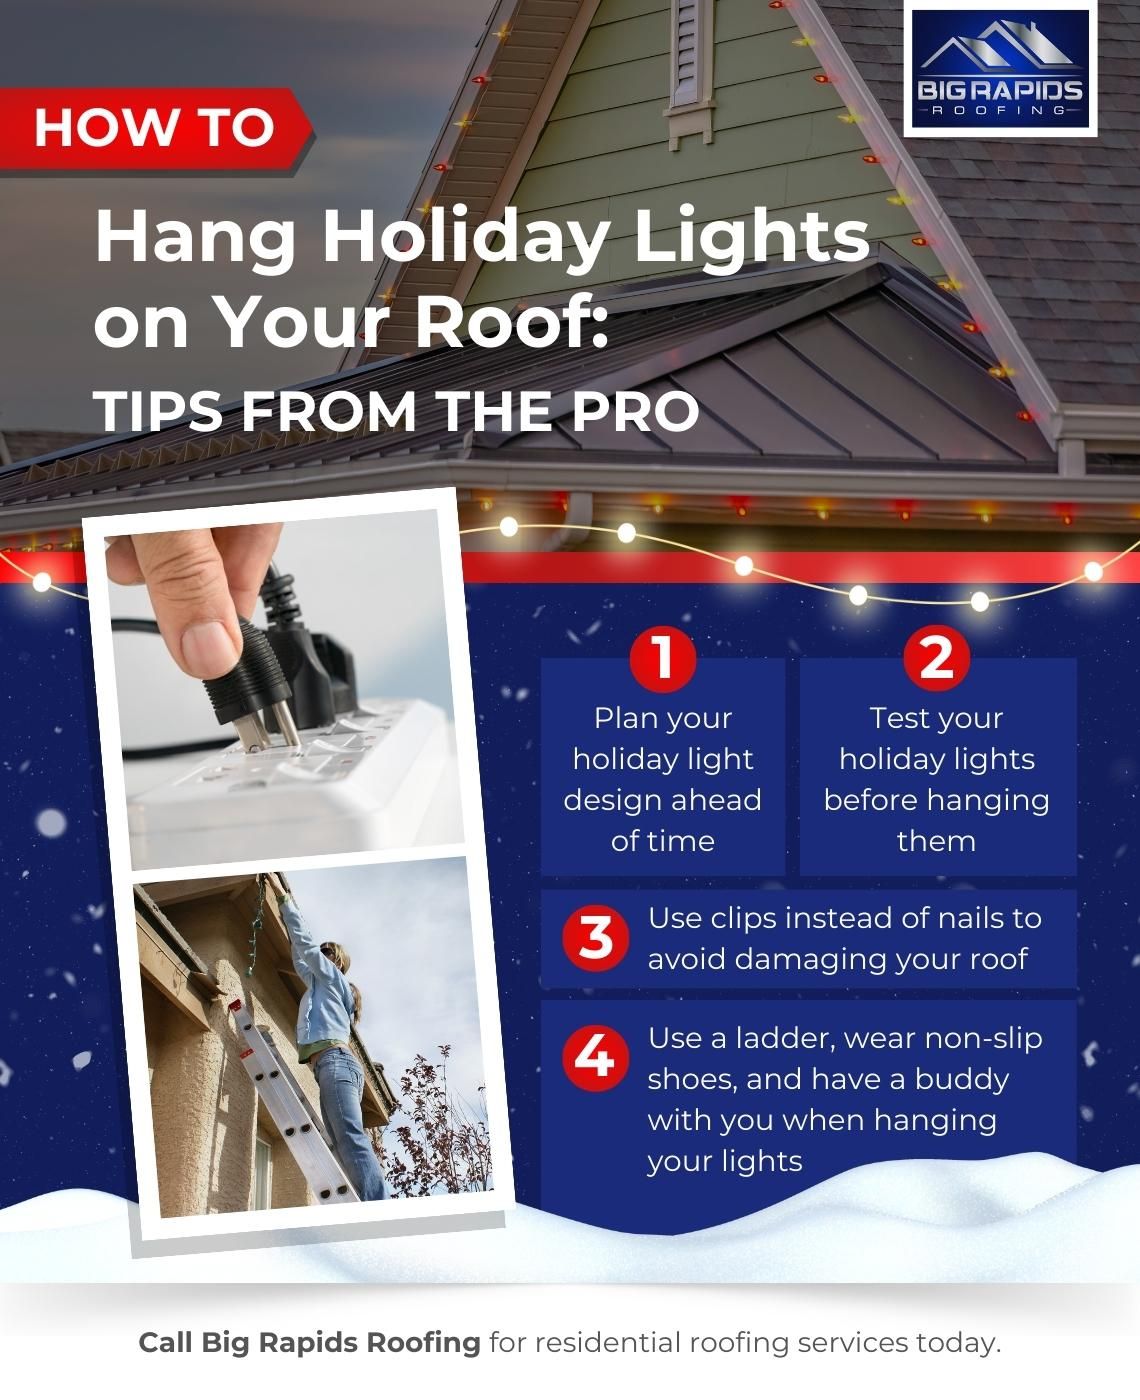 M36019-How to Hang Holiday Lights on Your Roof Tips from the Pros.jpg